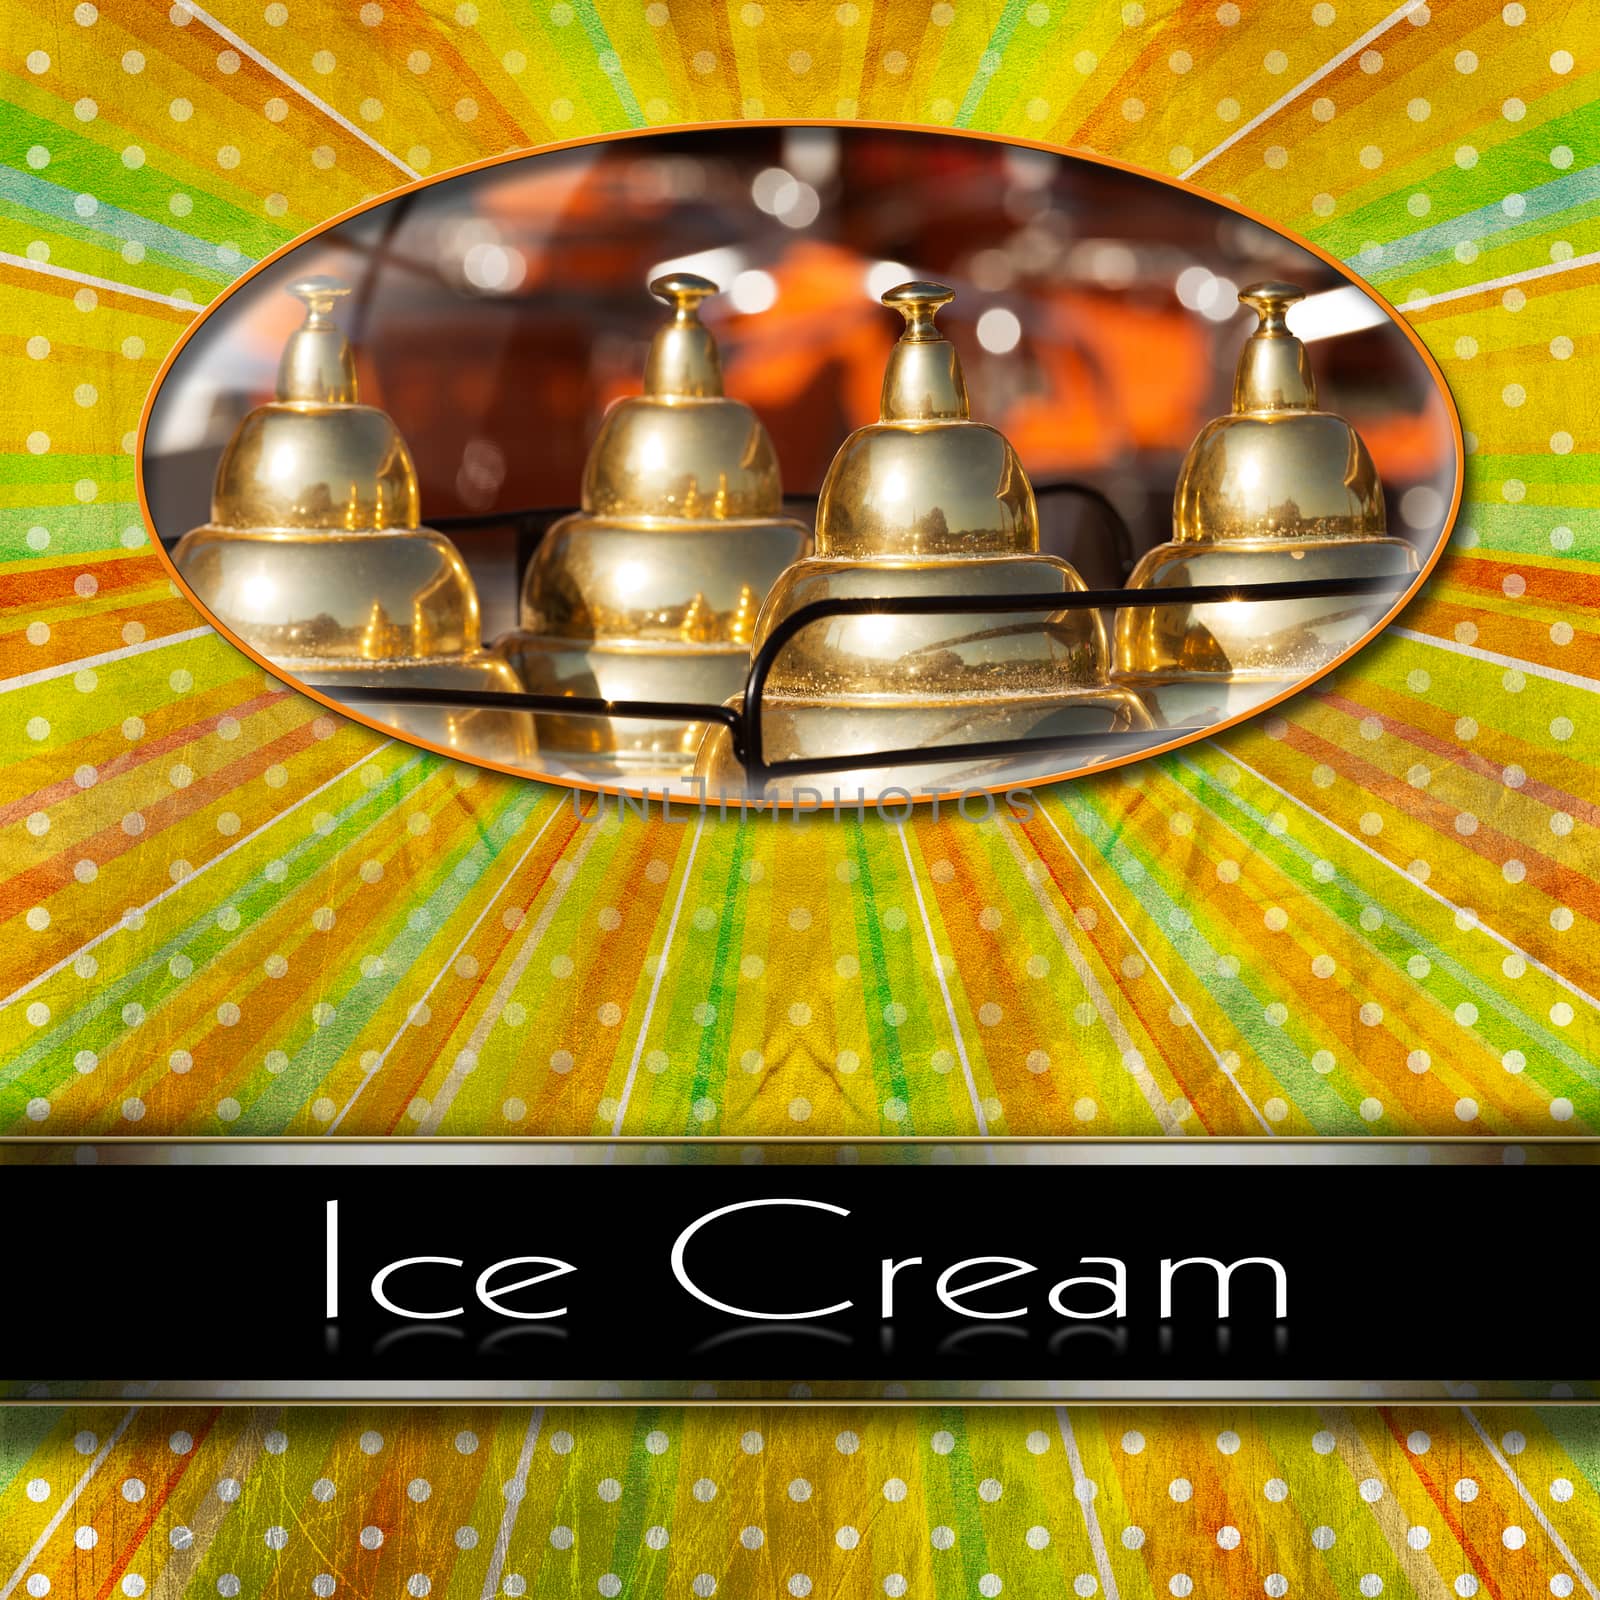 Vintage background with sunbeams stripes, detail of an ice cream cart and black band with text Ice Cream. Template for a ice cream menu